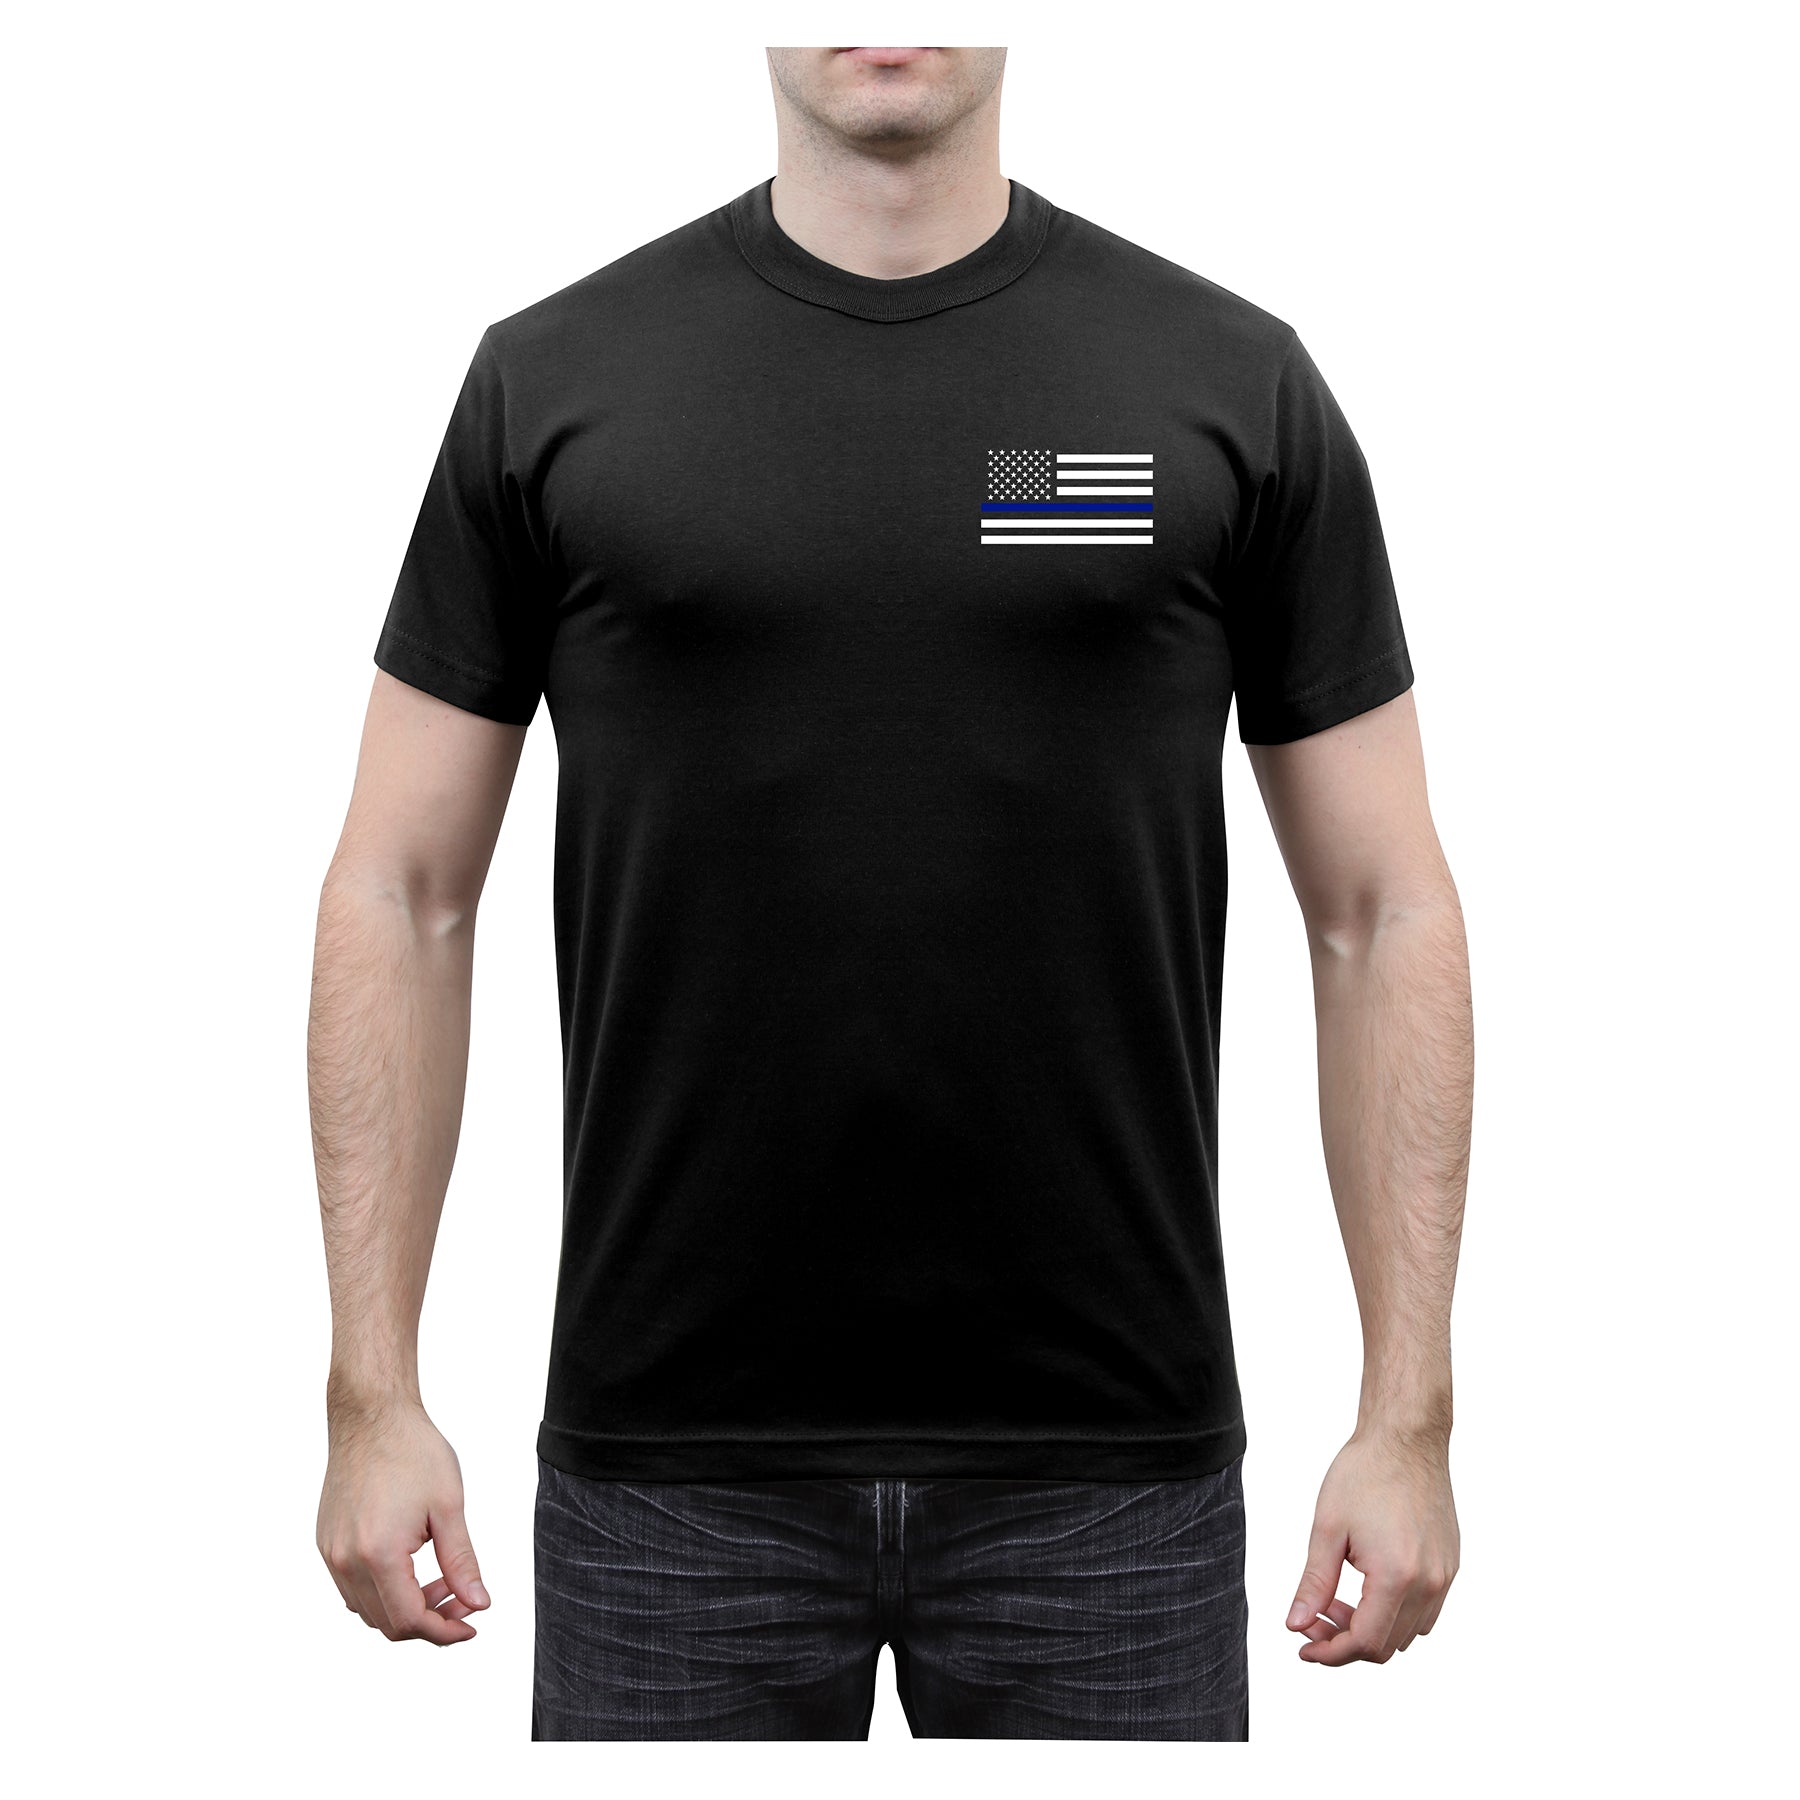 [Public Safety] Poly/Cotton Honor Respect Thin Blue Line T-Shirts Police Blue Line - Black